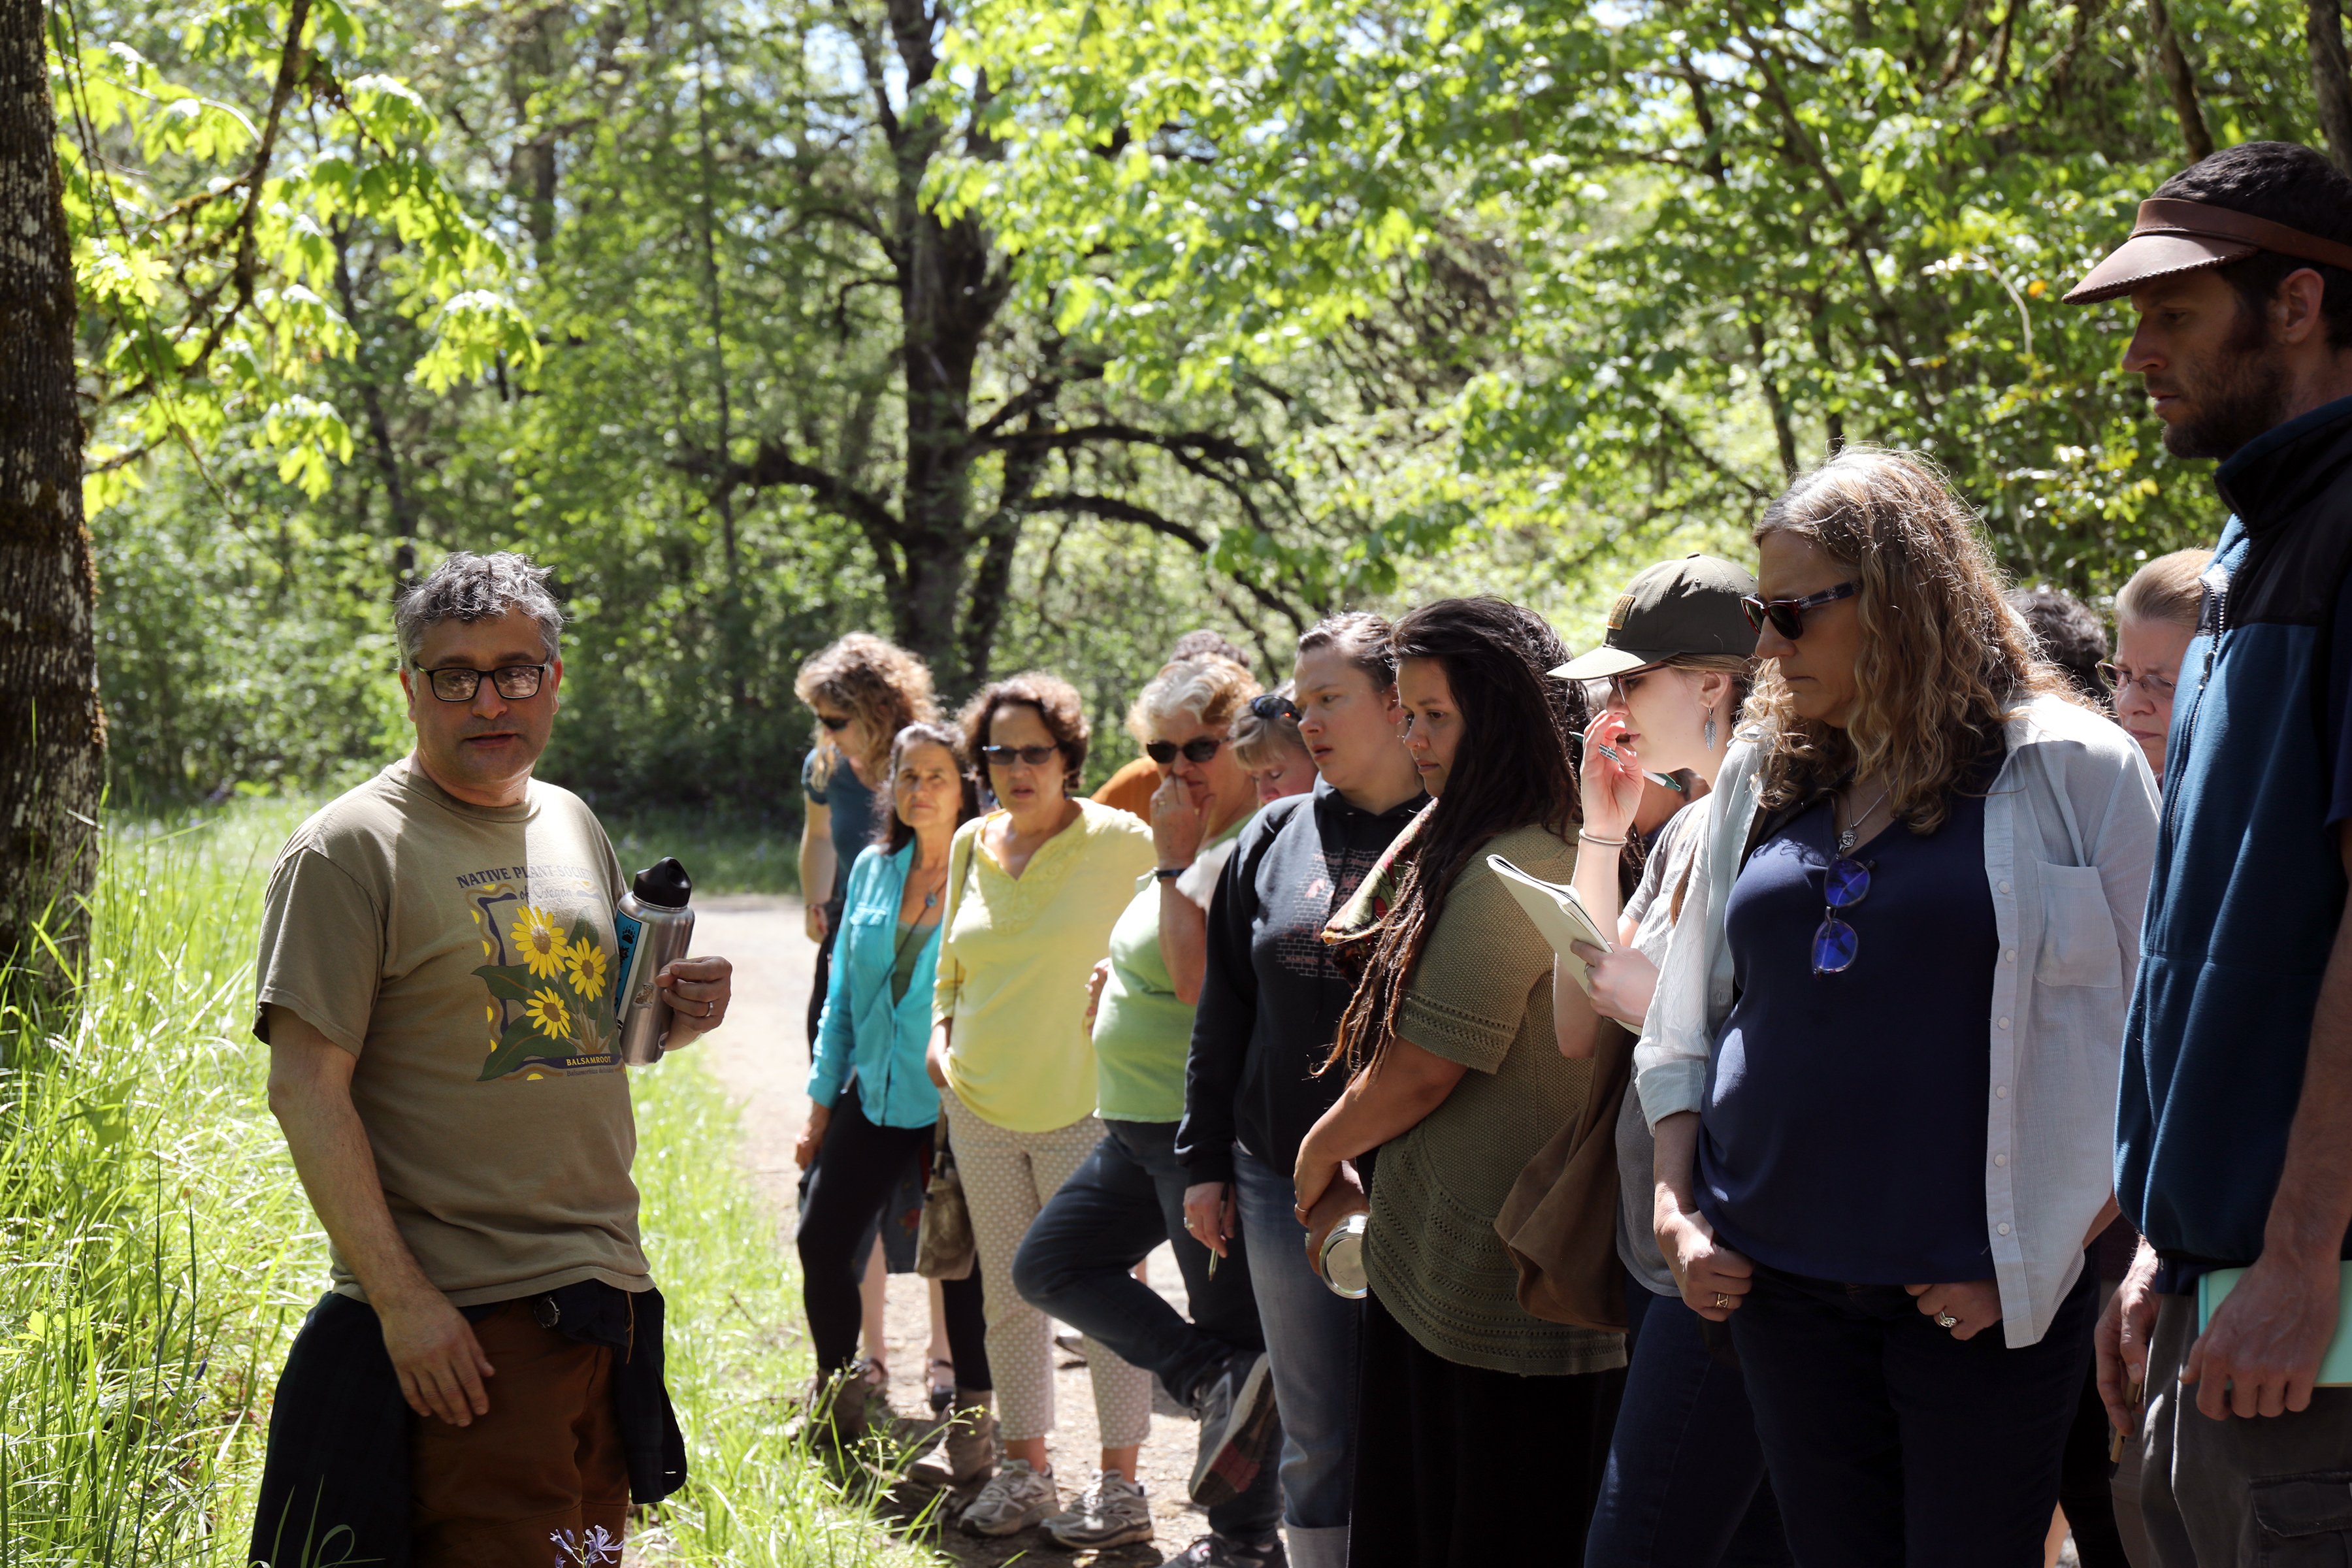 Quality control director, Steven Yaeger, takes participants on a plant identification walk in natural areas in Eugene, Oregon. Identifying plants is important to the botanical trade. 